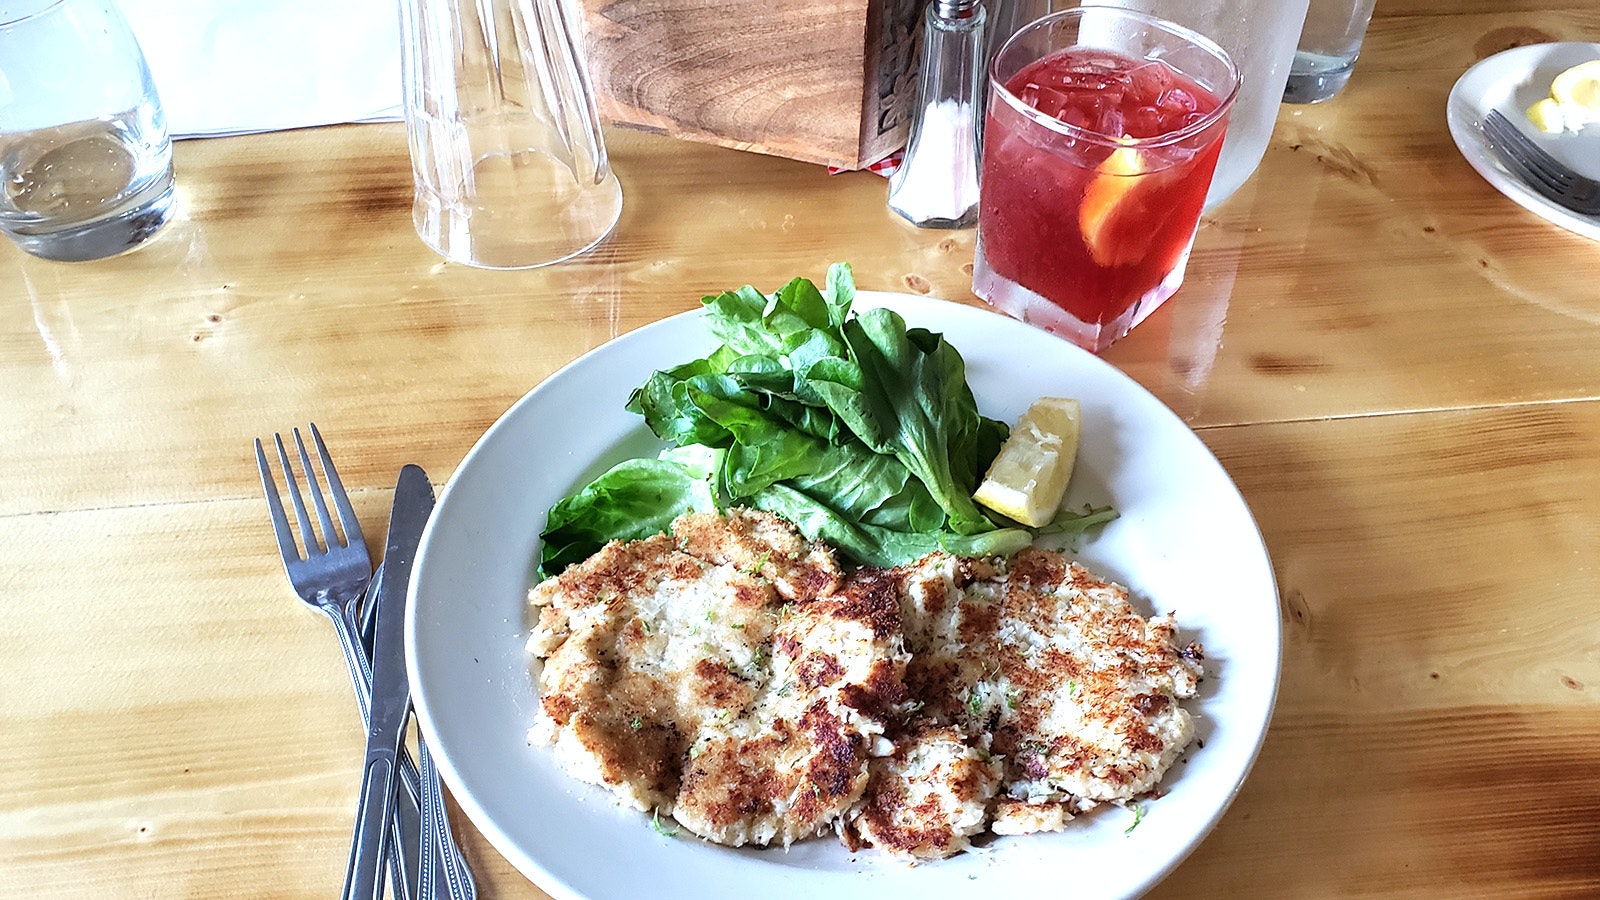 Crab cakes with a prairie rose cocktail.